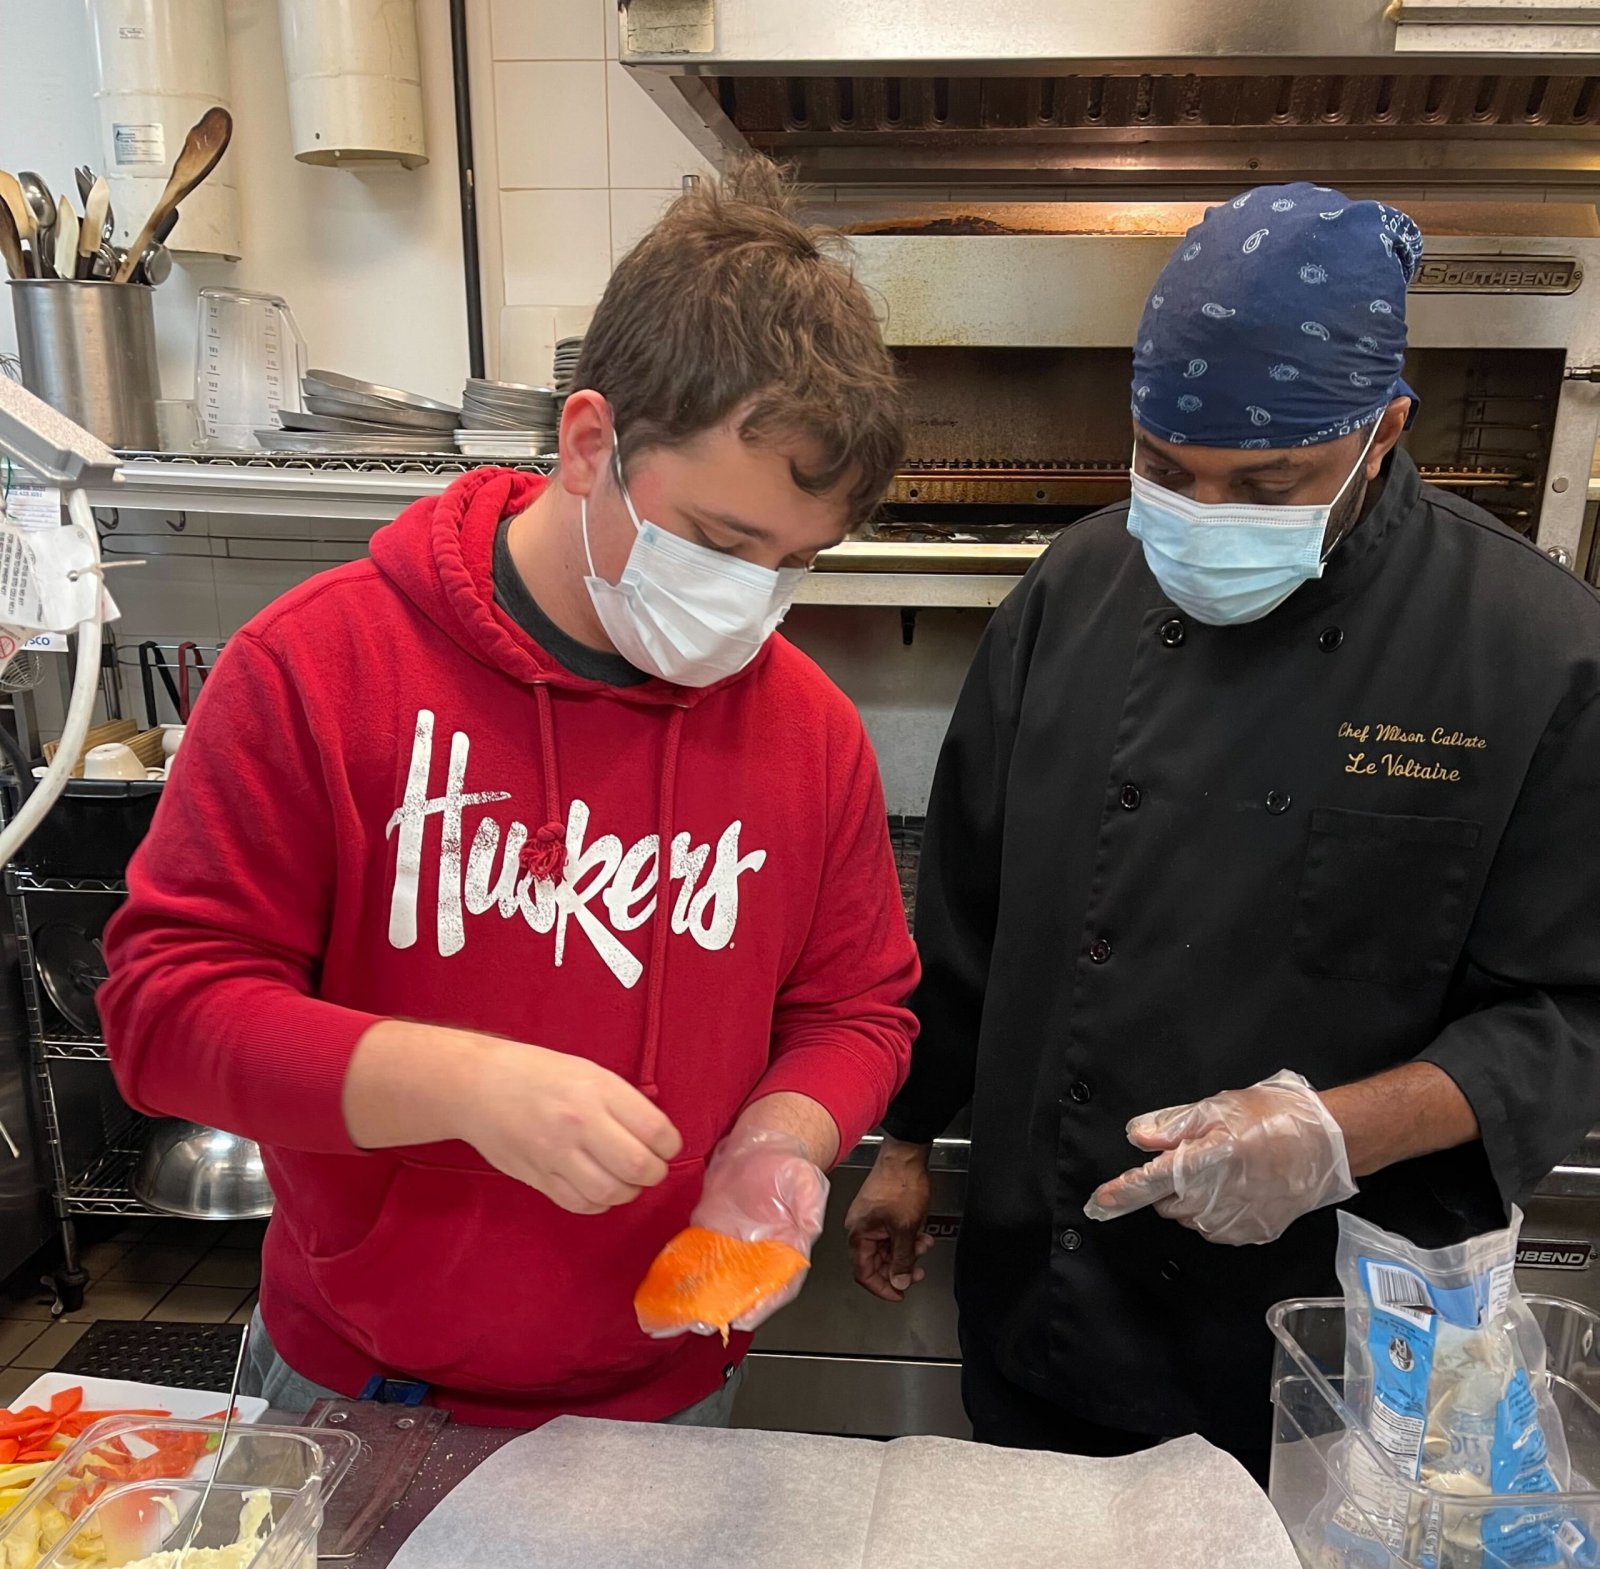 A Quest Forward Academy student works alongside a professional chef in a restaurant kitchen in Omaha.